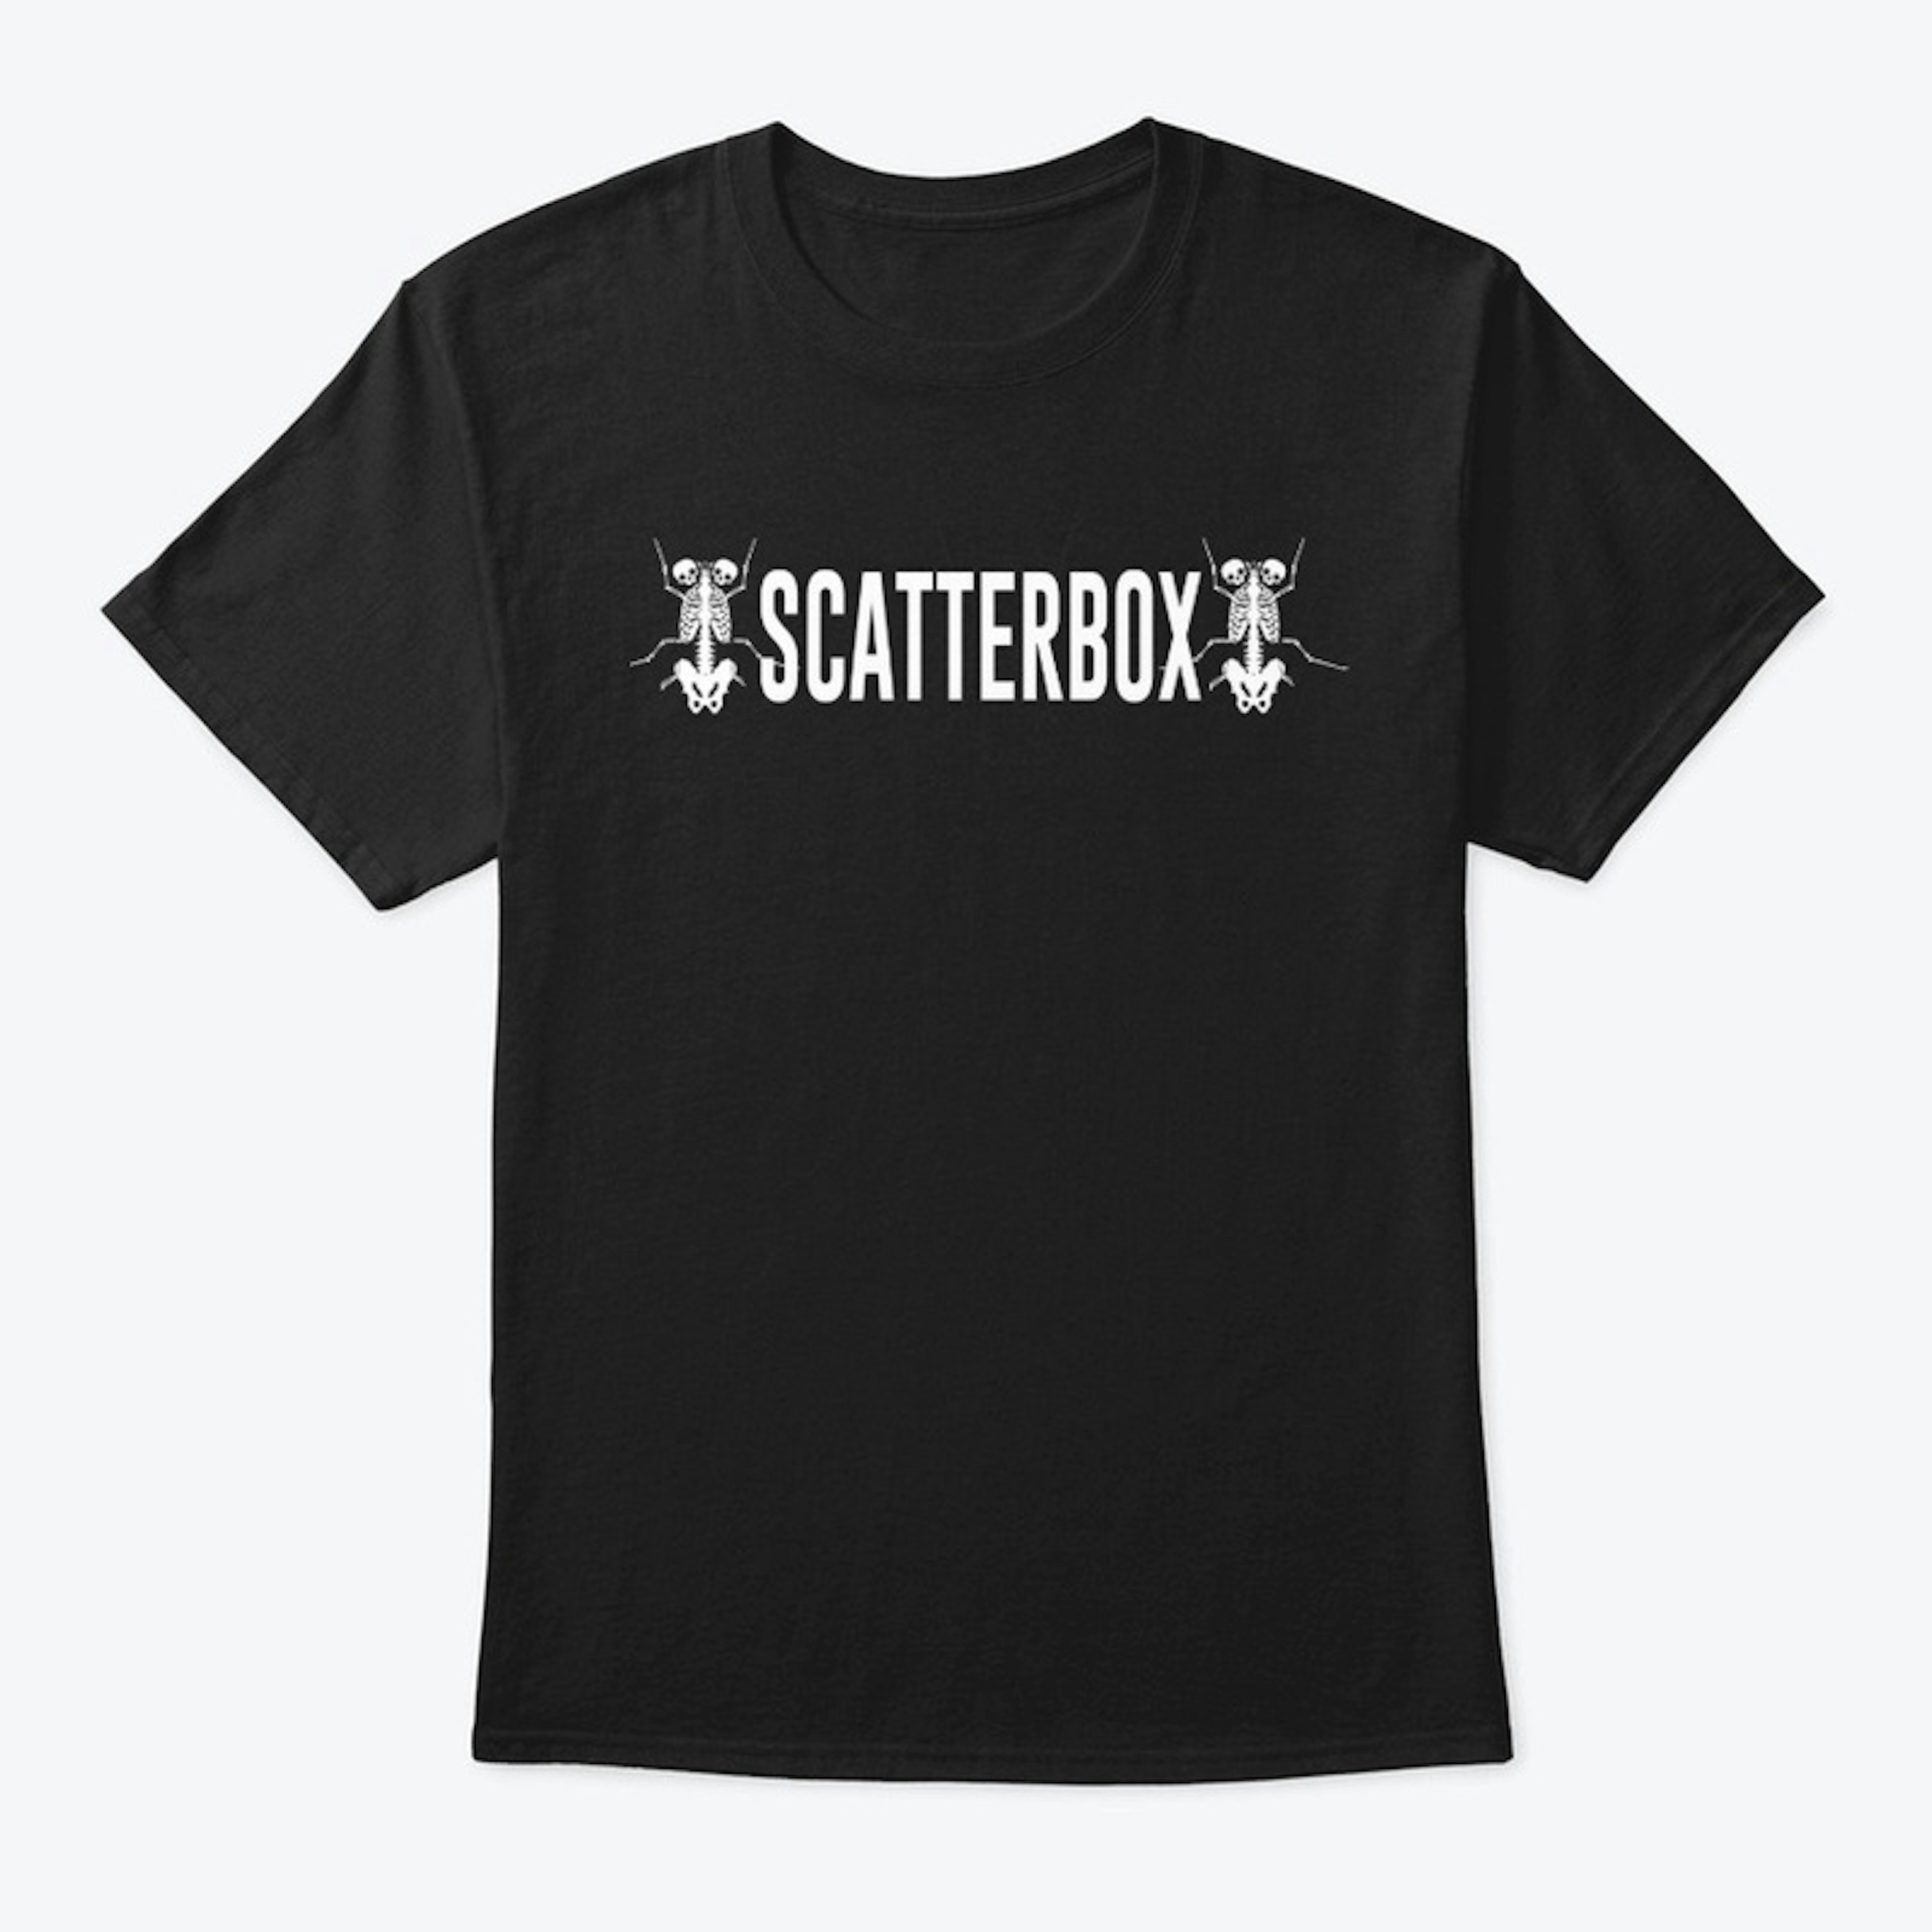 Scatterbox "Bug" T-Shirt